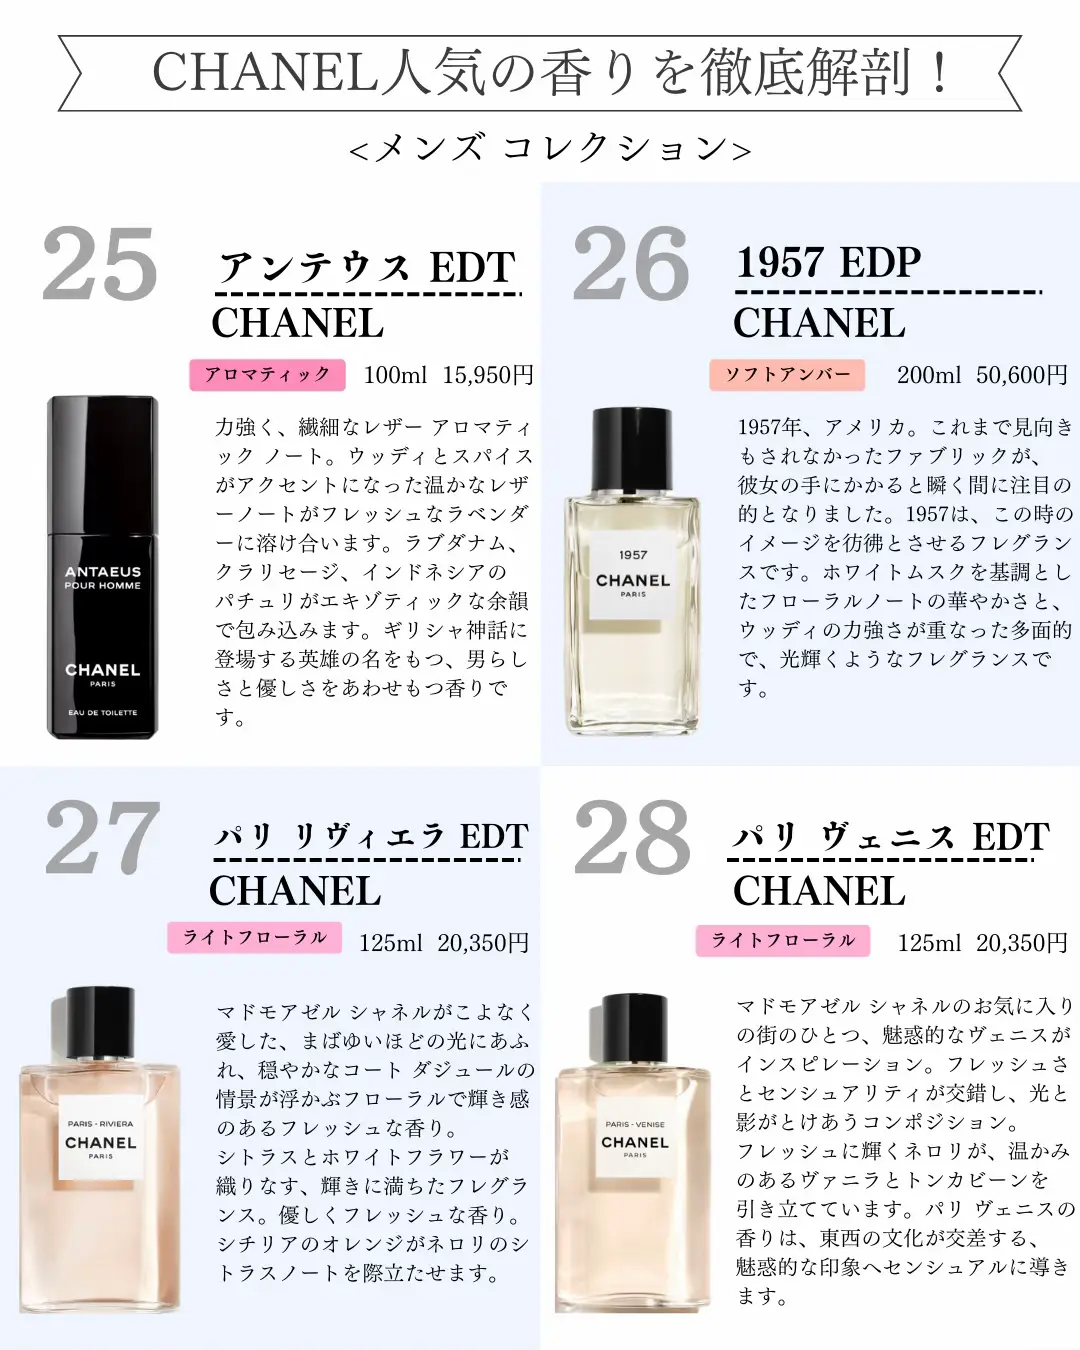 Introducing recommended scents for men and women] Thorough dissection of  all 32 popular perfumes of CHANEL❣️, Gallery posted by こうすい男子【香水・香り】